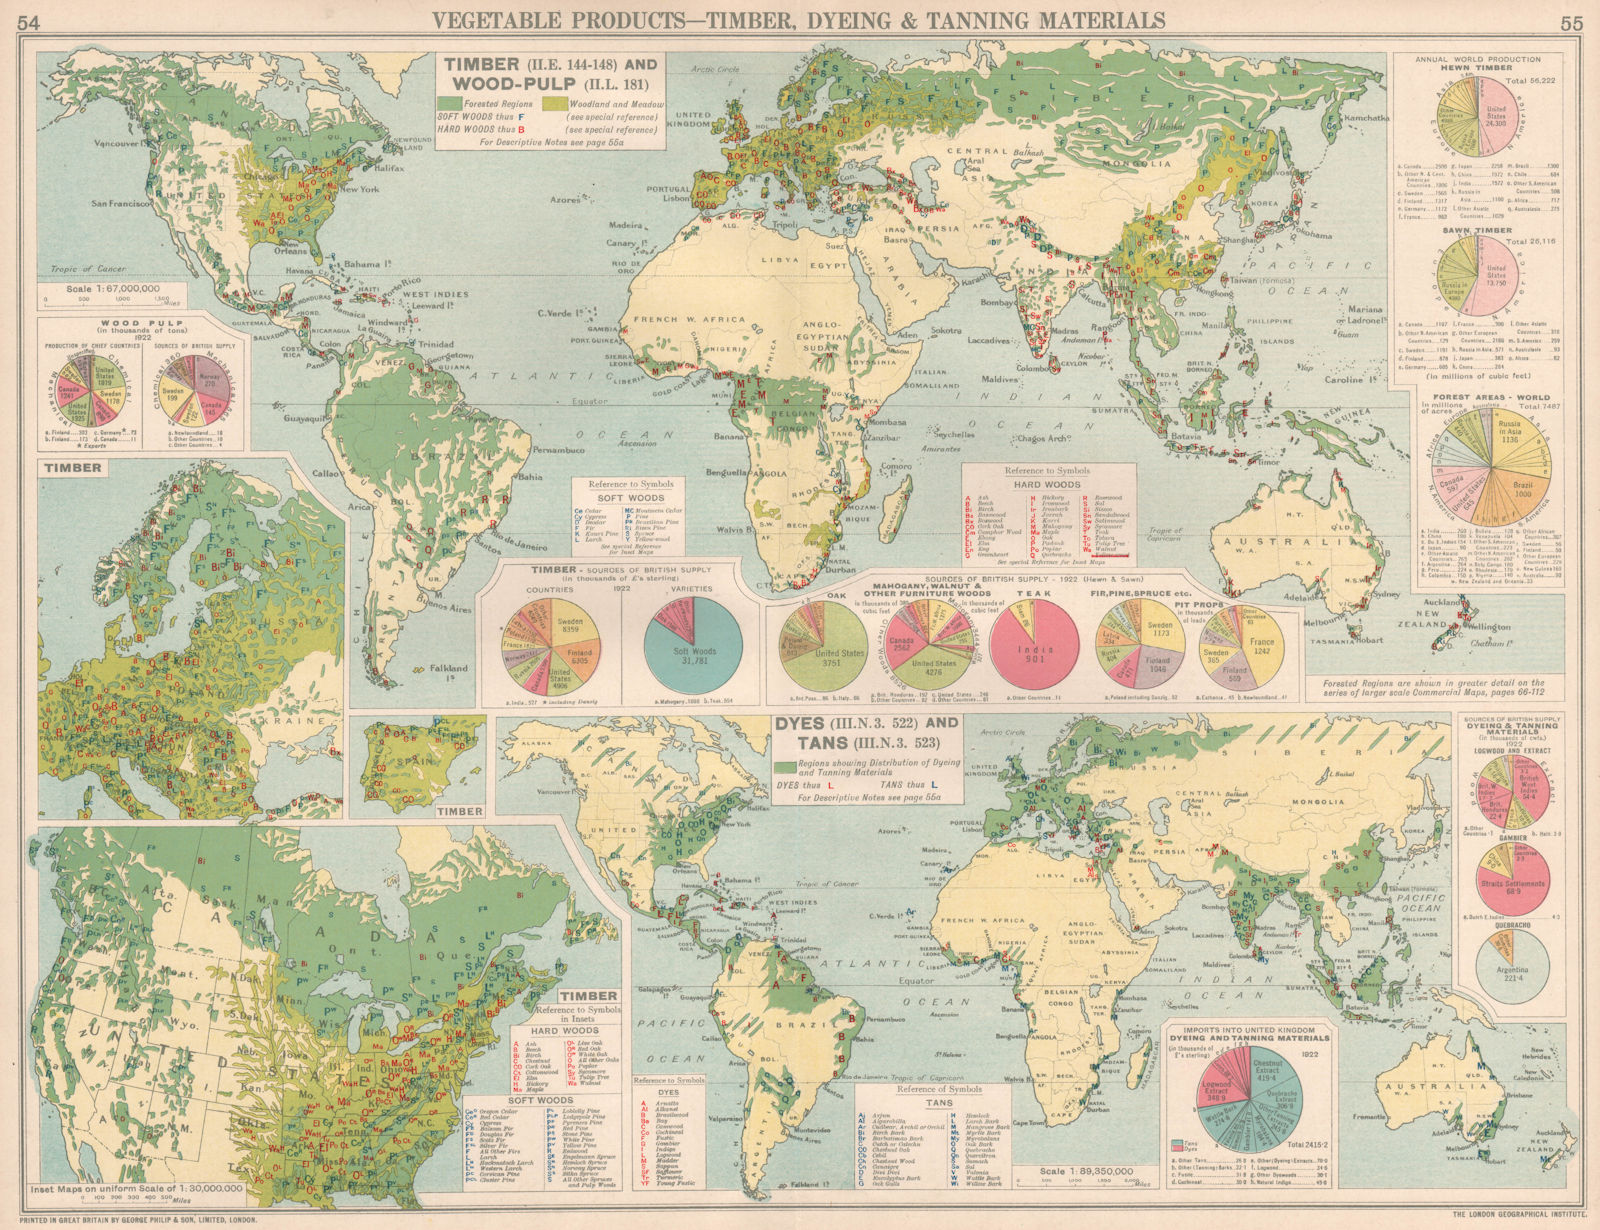 Associate Product World. Timber, Dyeing & Tanning Material production. Wood pulp 1925 old map